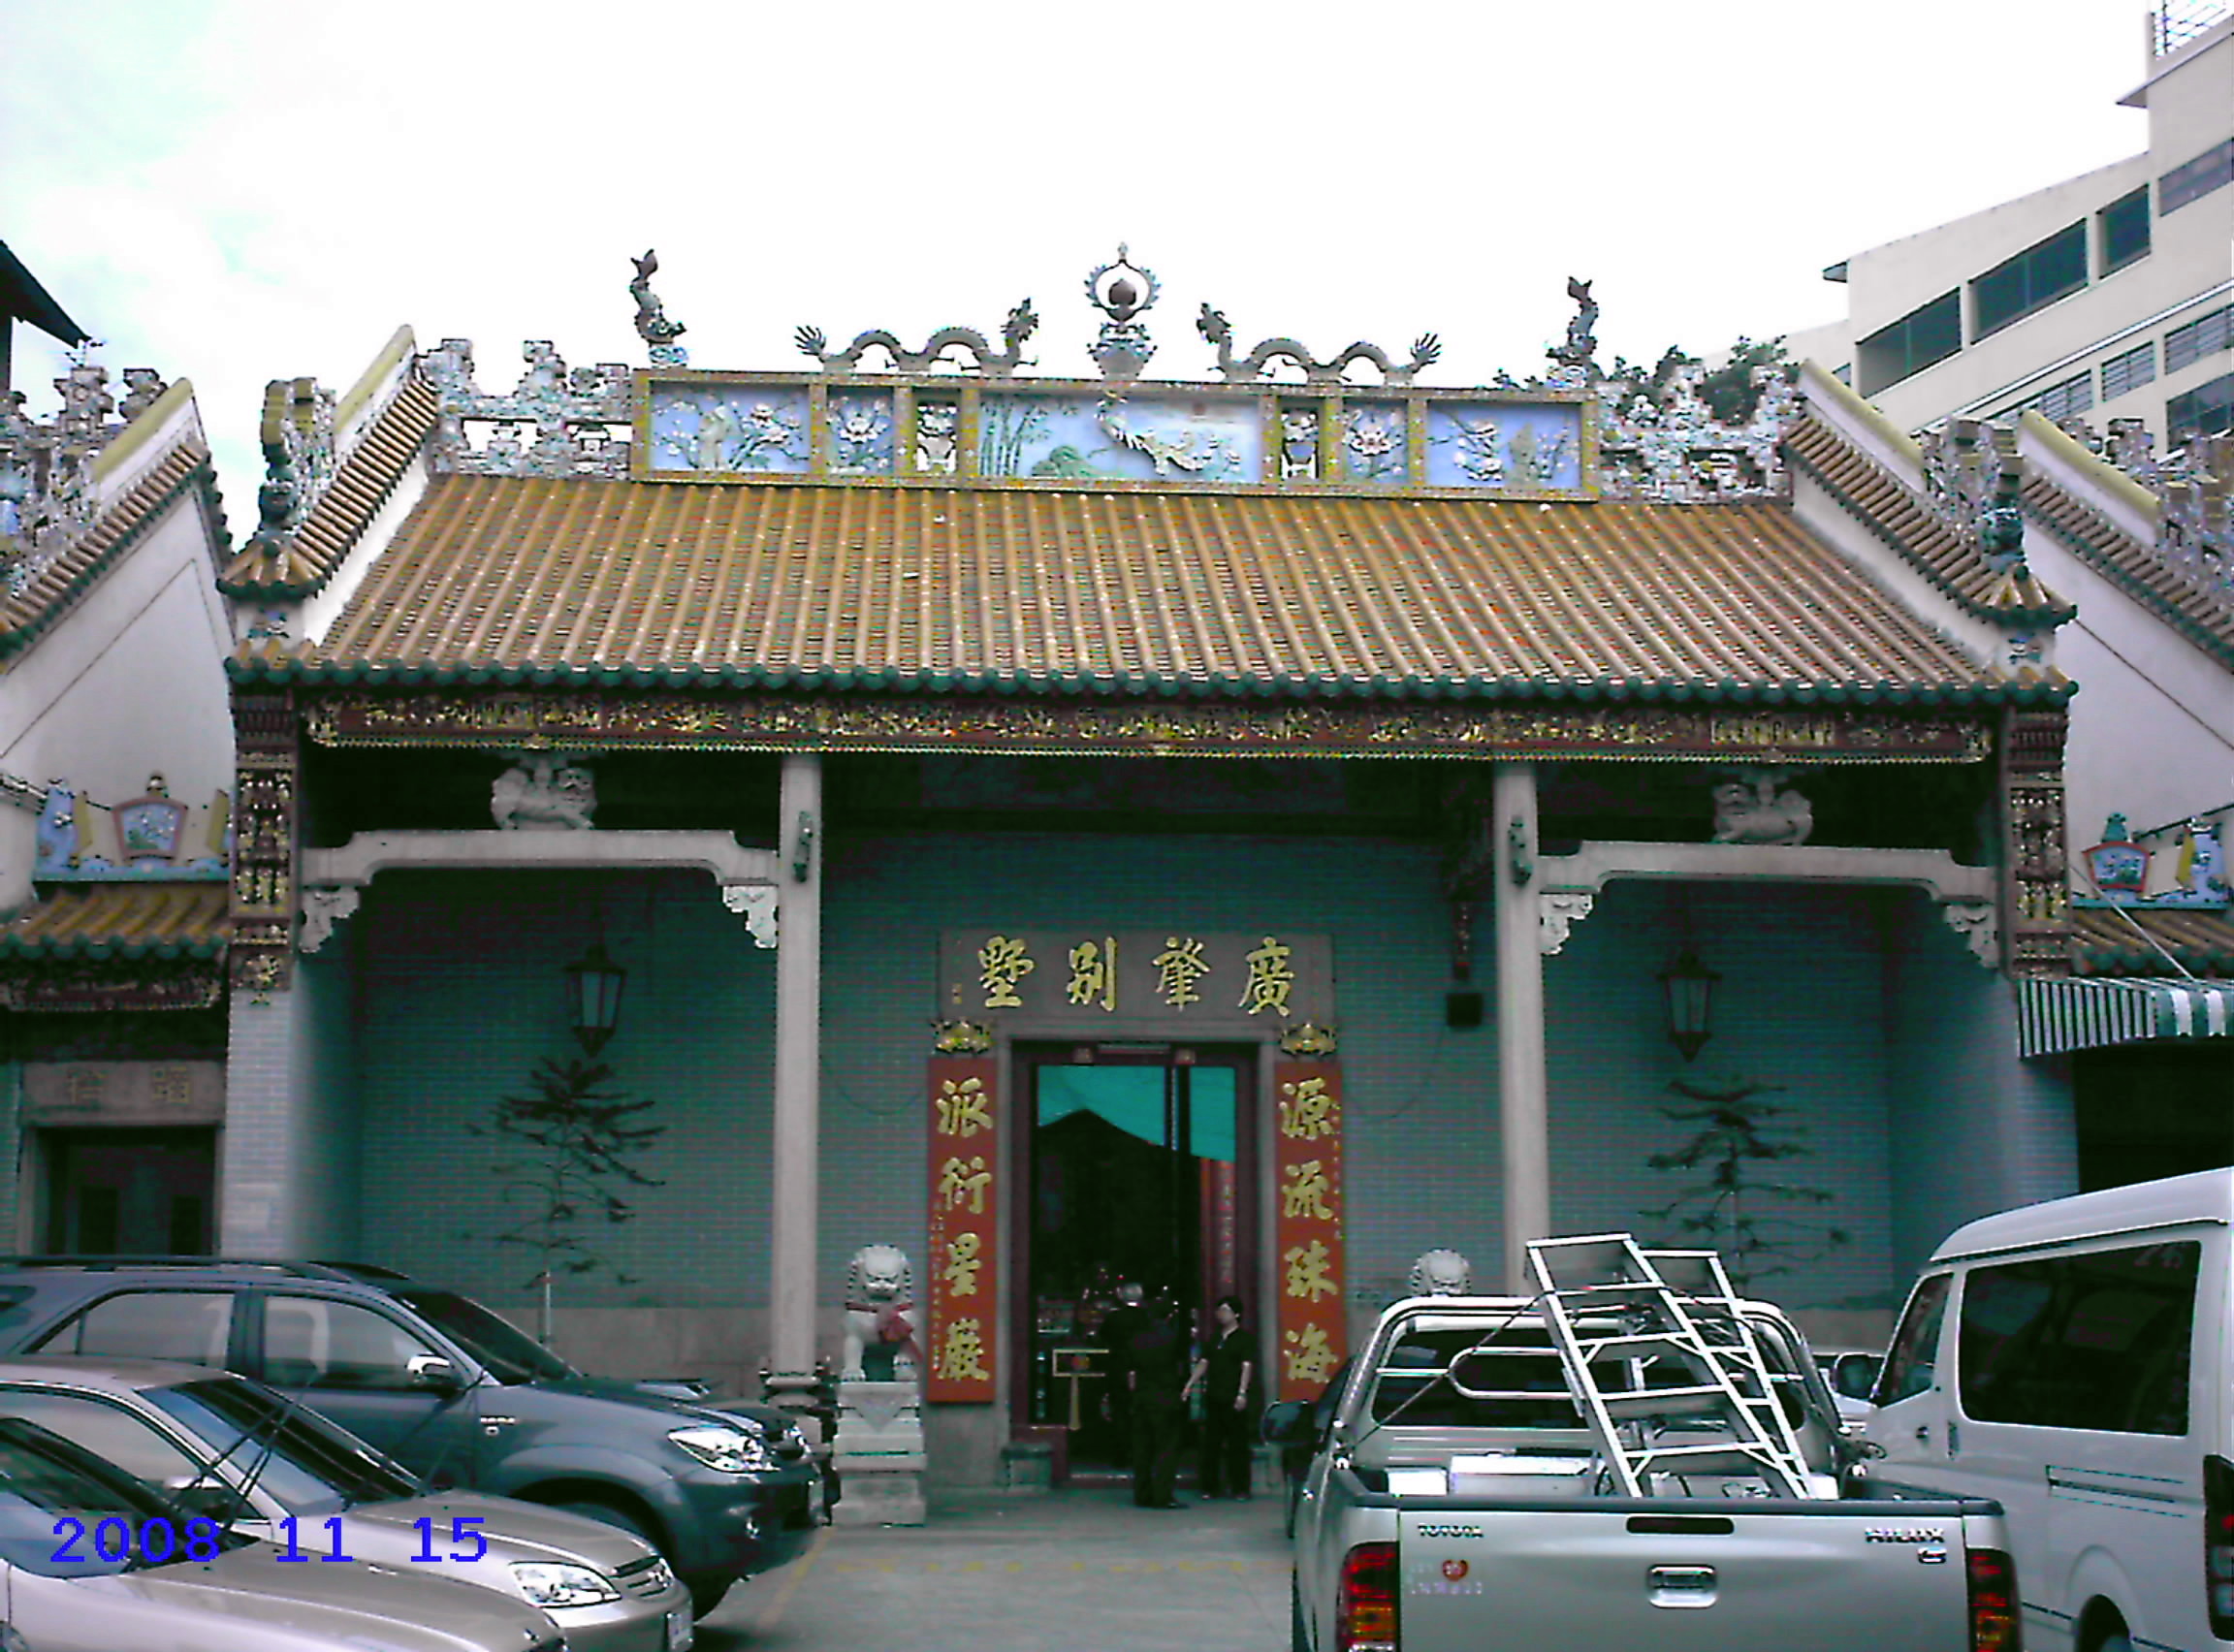 Kwong_Siew_Association_of_Thailand_Temple.JPG